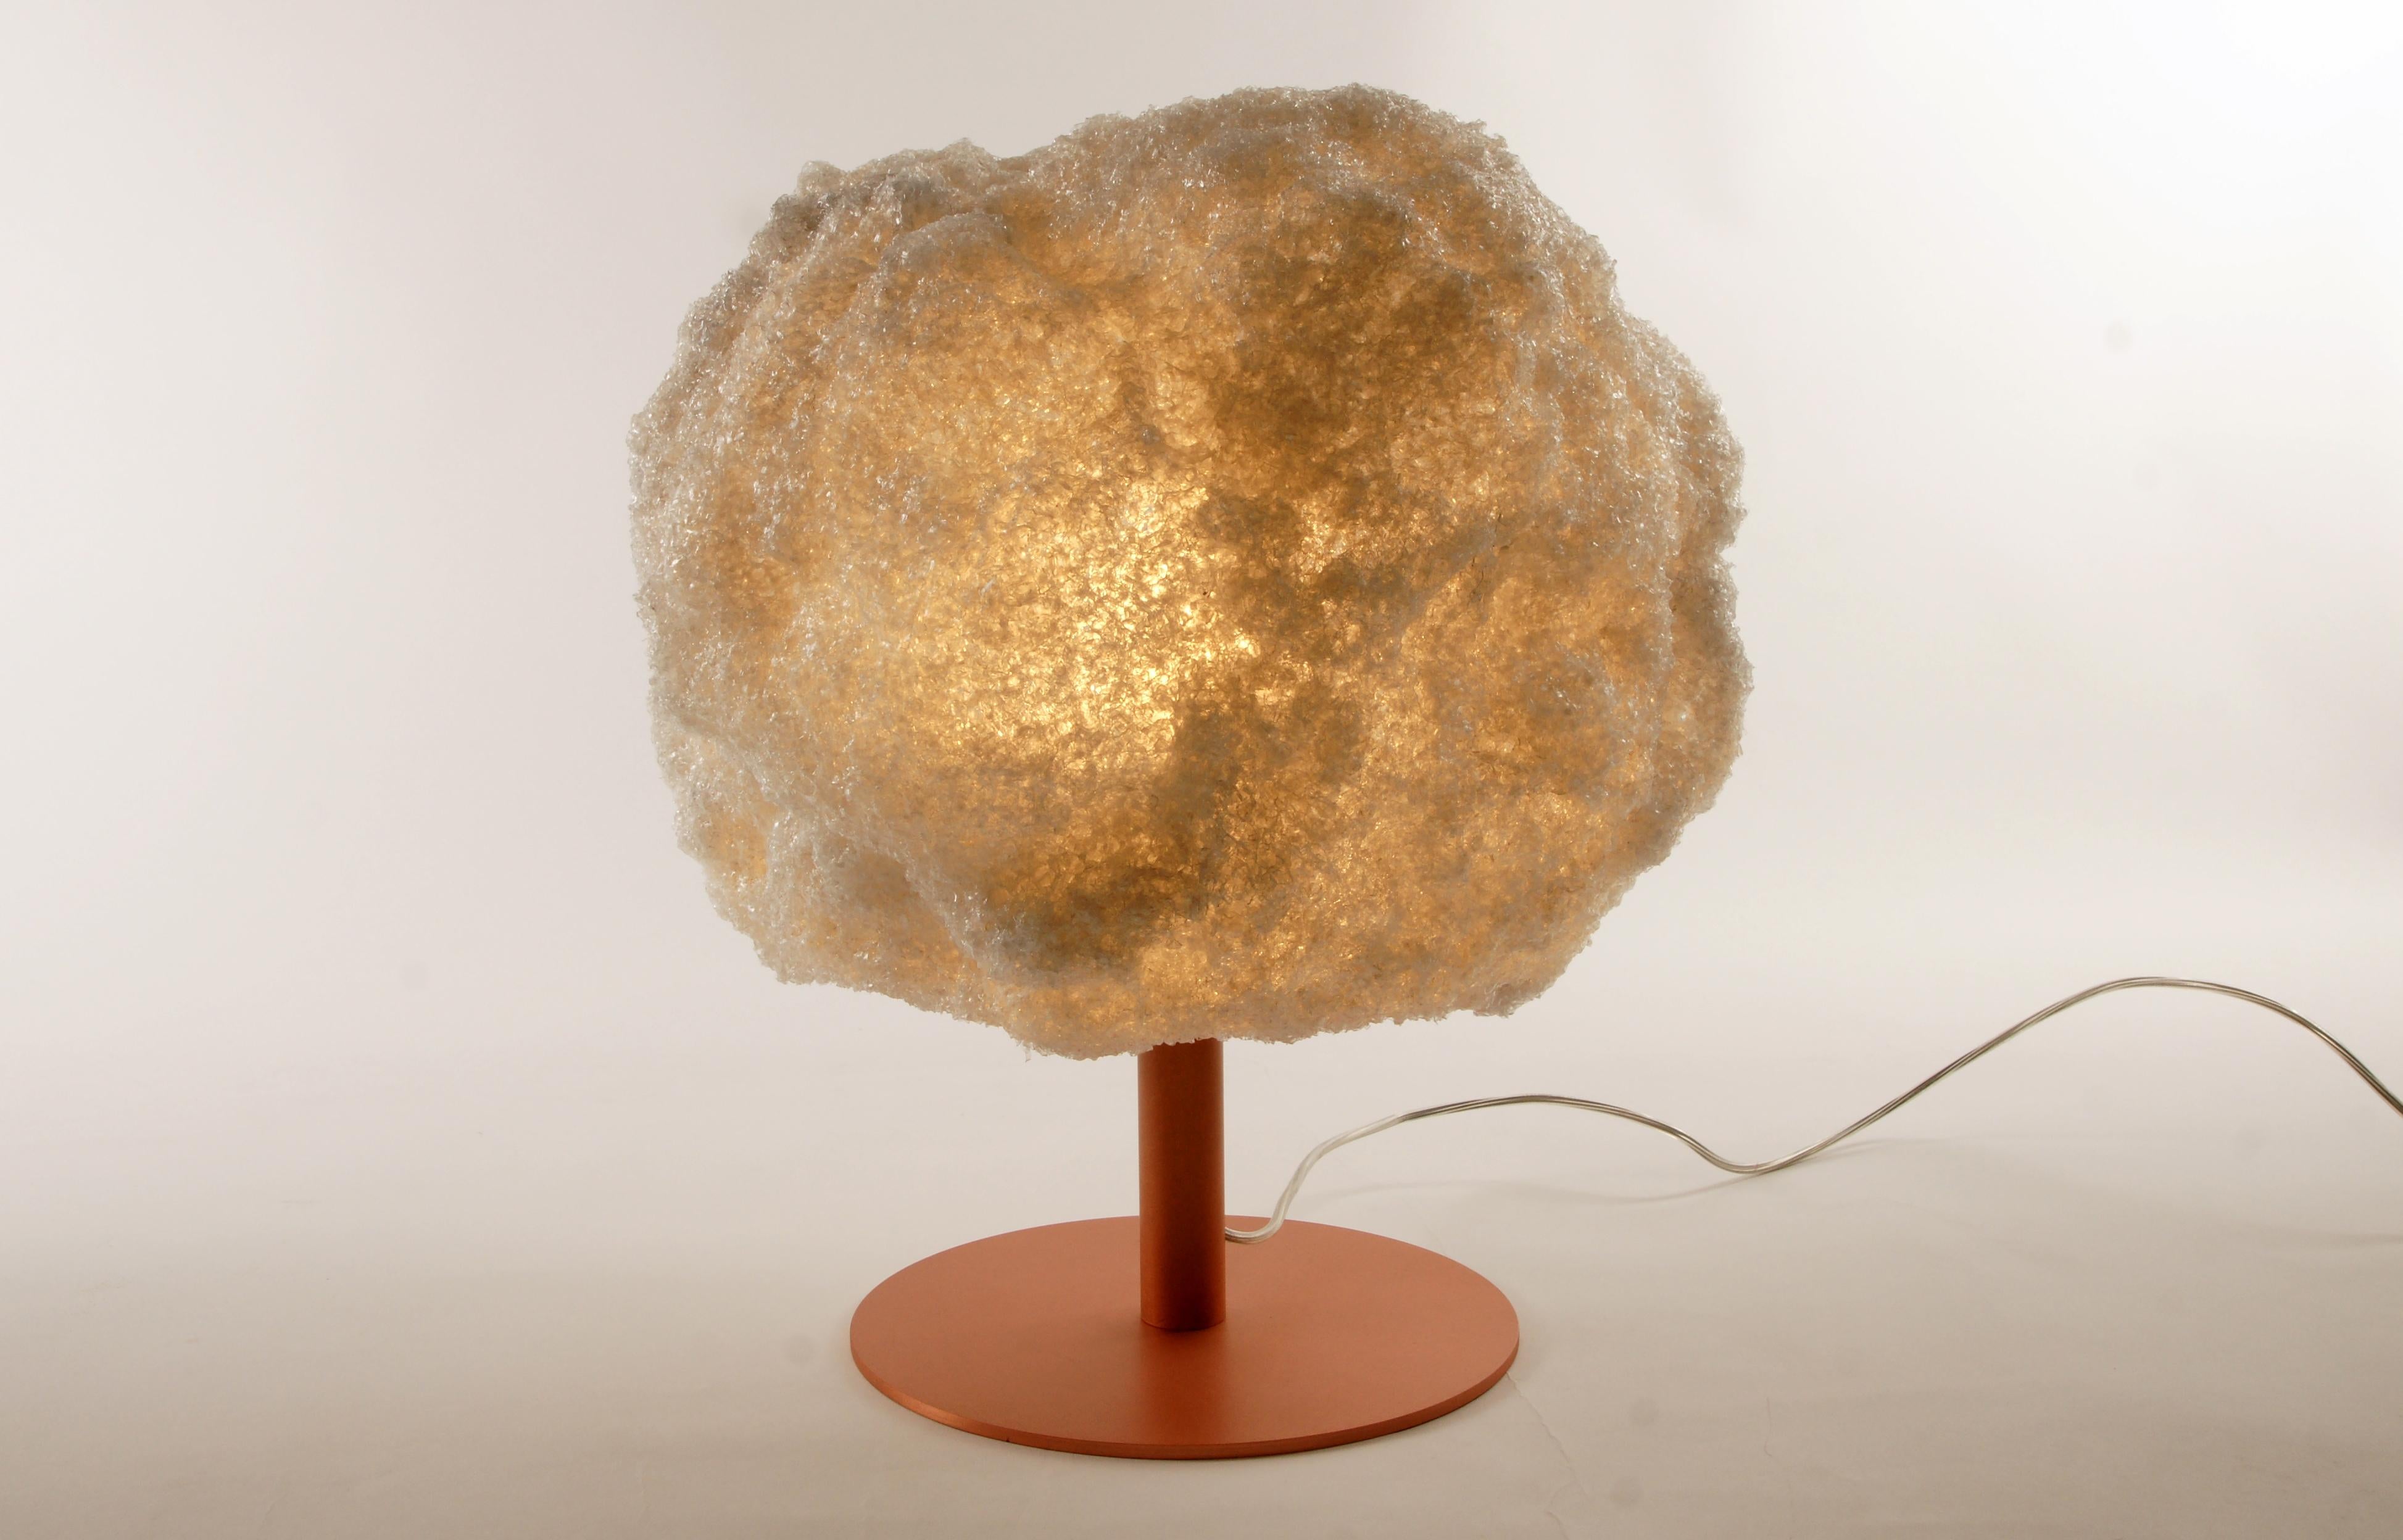 Storm table light copper by Johannes Hemann
Material: Polycarbonate, walnut
Dimensions: Ø 38 x H 45 cm.

The Storm Series is by its concept the purest example of a process-design, where the designer seeks to set creative parameters to allow an